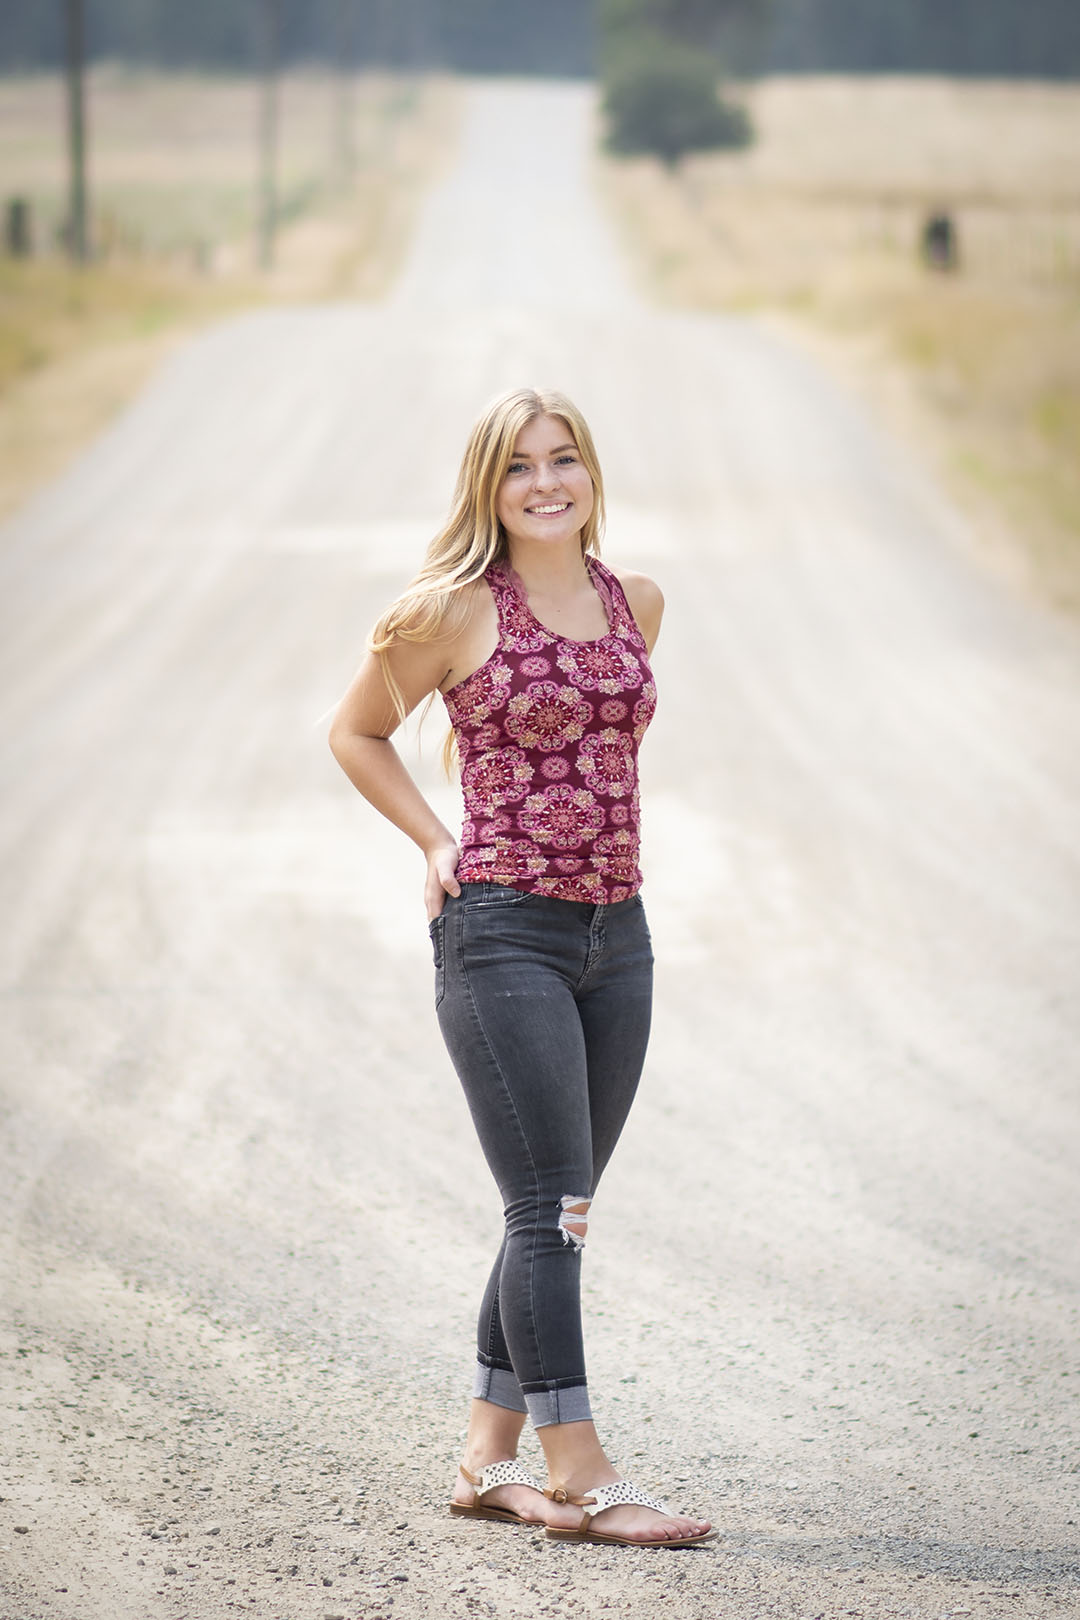 blonde-haired teenager stands on a dirt road smiling in this senior portraits shoot taken by adina stiles photography